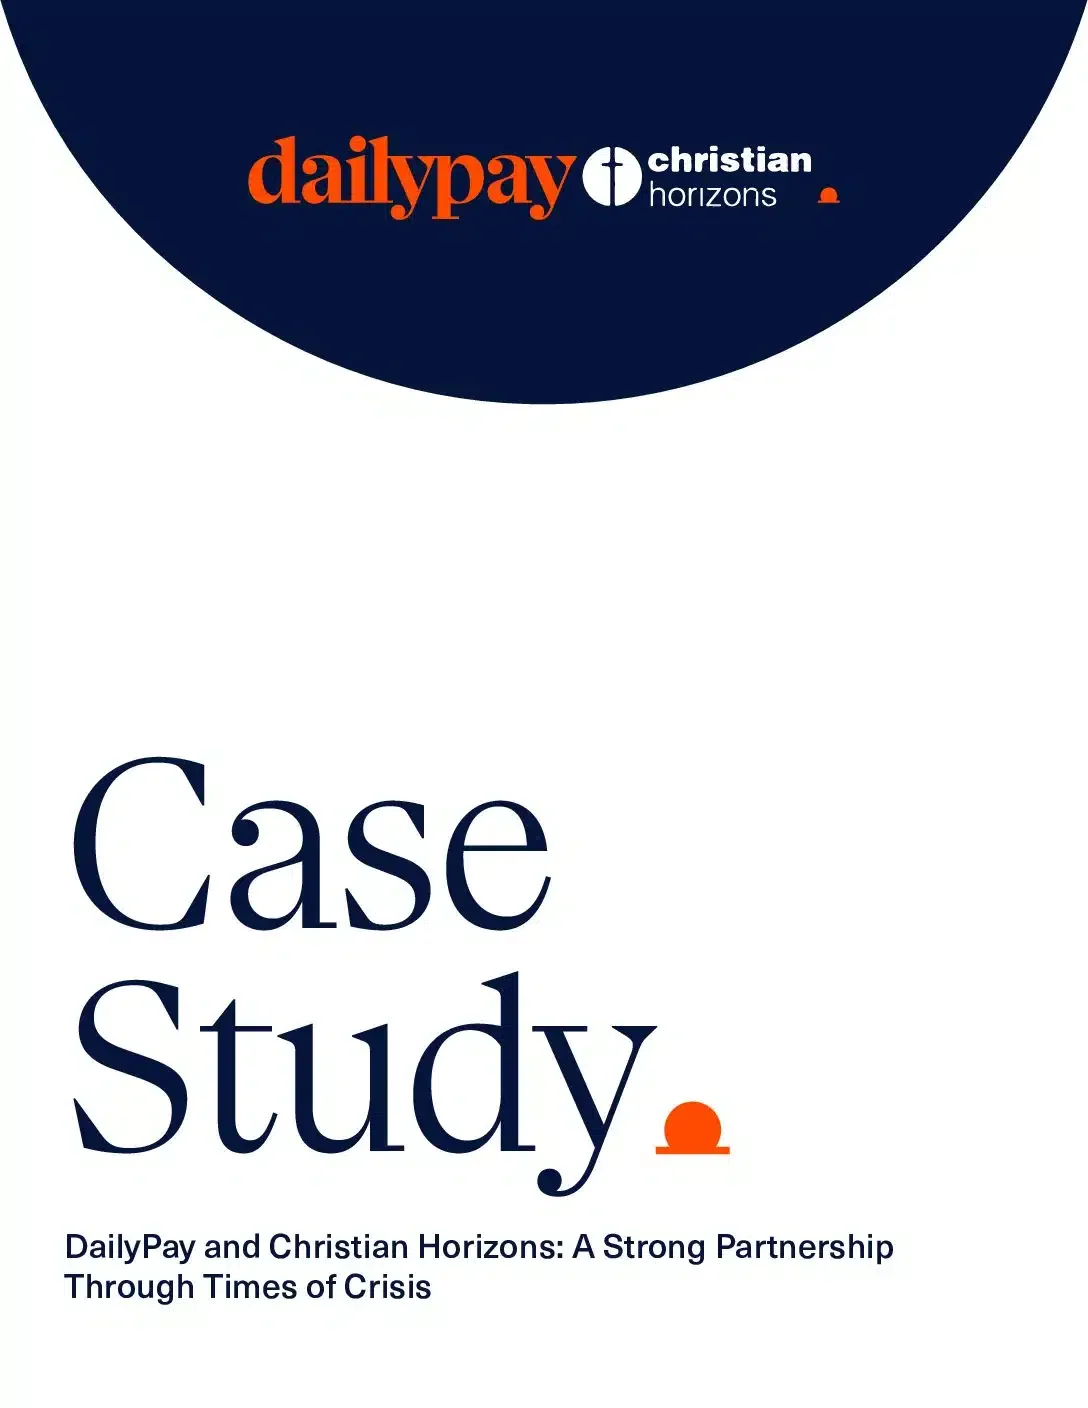 A structured image features a dark blue circular header with the logos of DailyPay and Christian Horizons. Below the header, the title "Case Study" is prominently displayed in large blue text. Underneath, smaller text reads, "DailyPay and Christian Horizons: A Strong Partnership Through Times of Crisis.